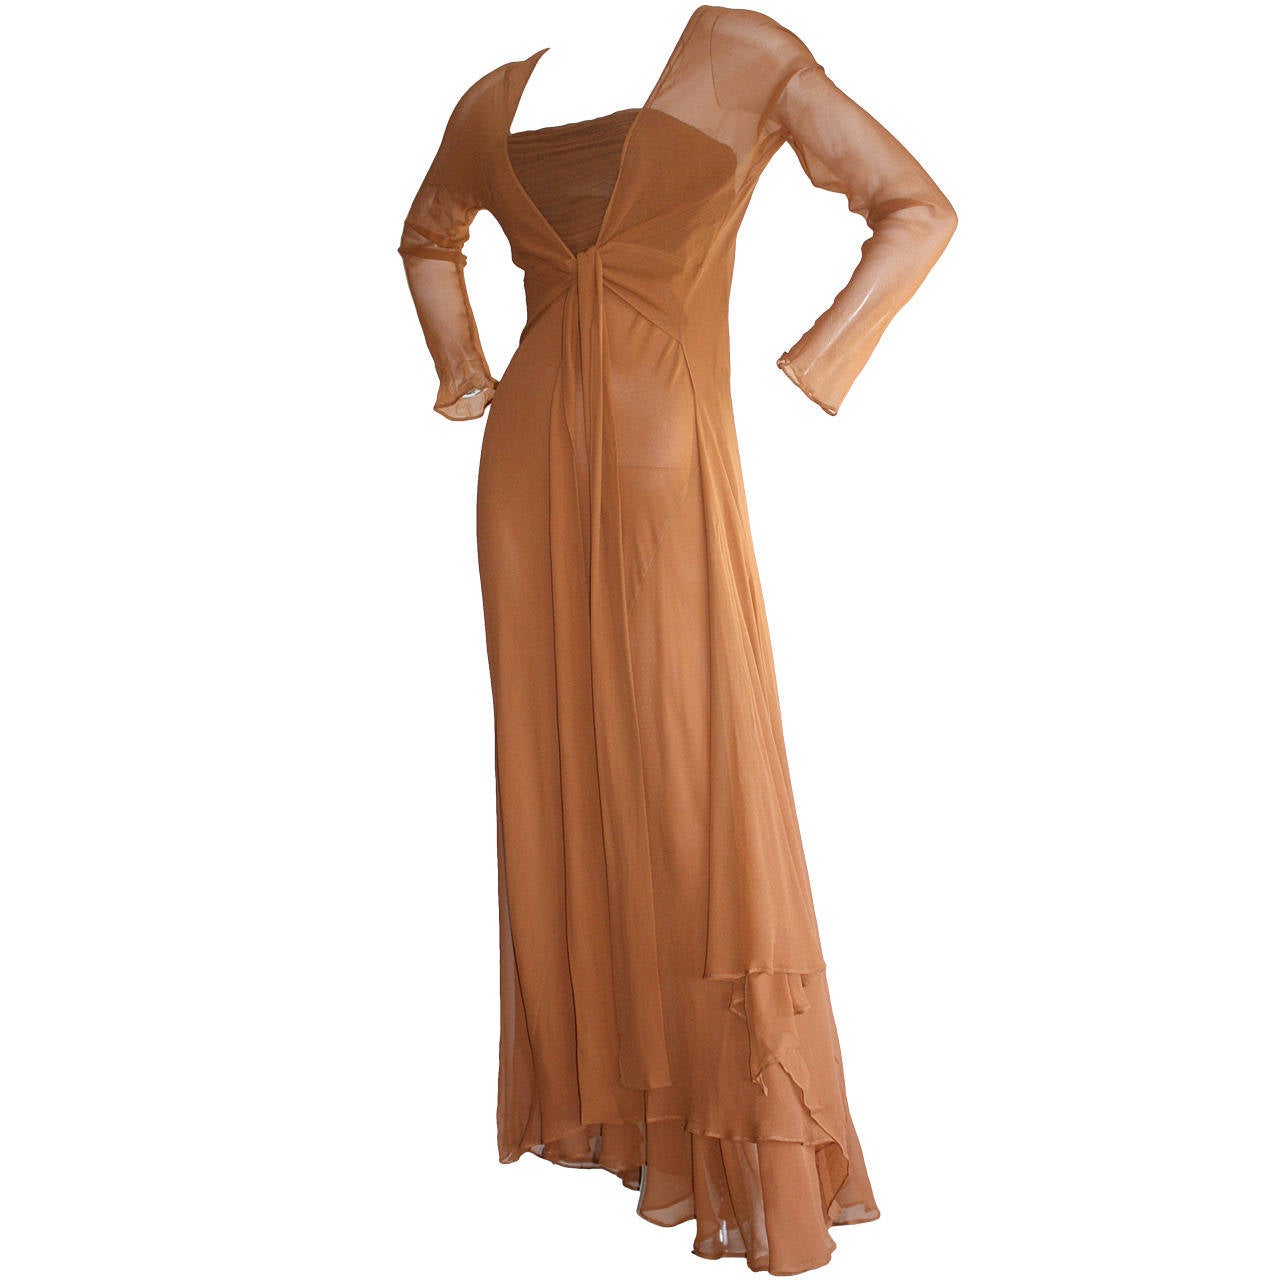 Exquisite Vintage Alberta Ferretti Grecian Goddess Chiffon Gown And Jacket For Sale